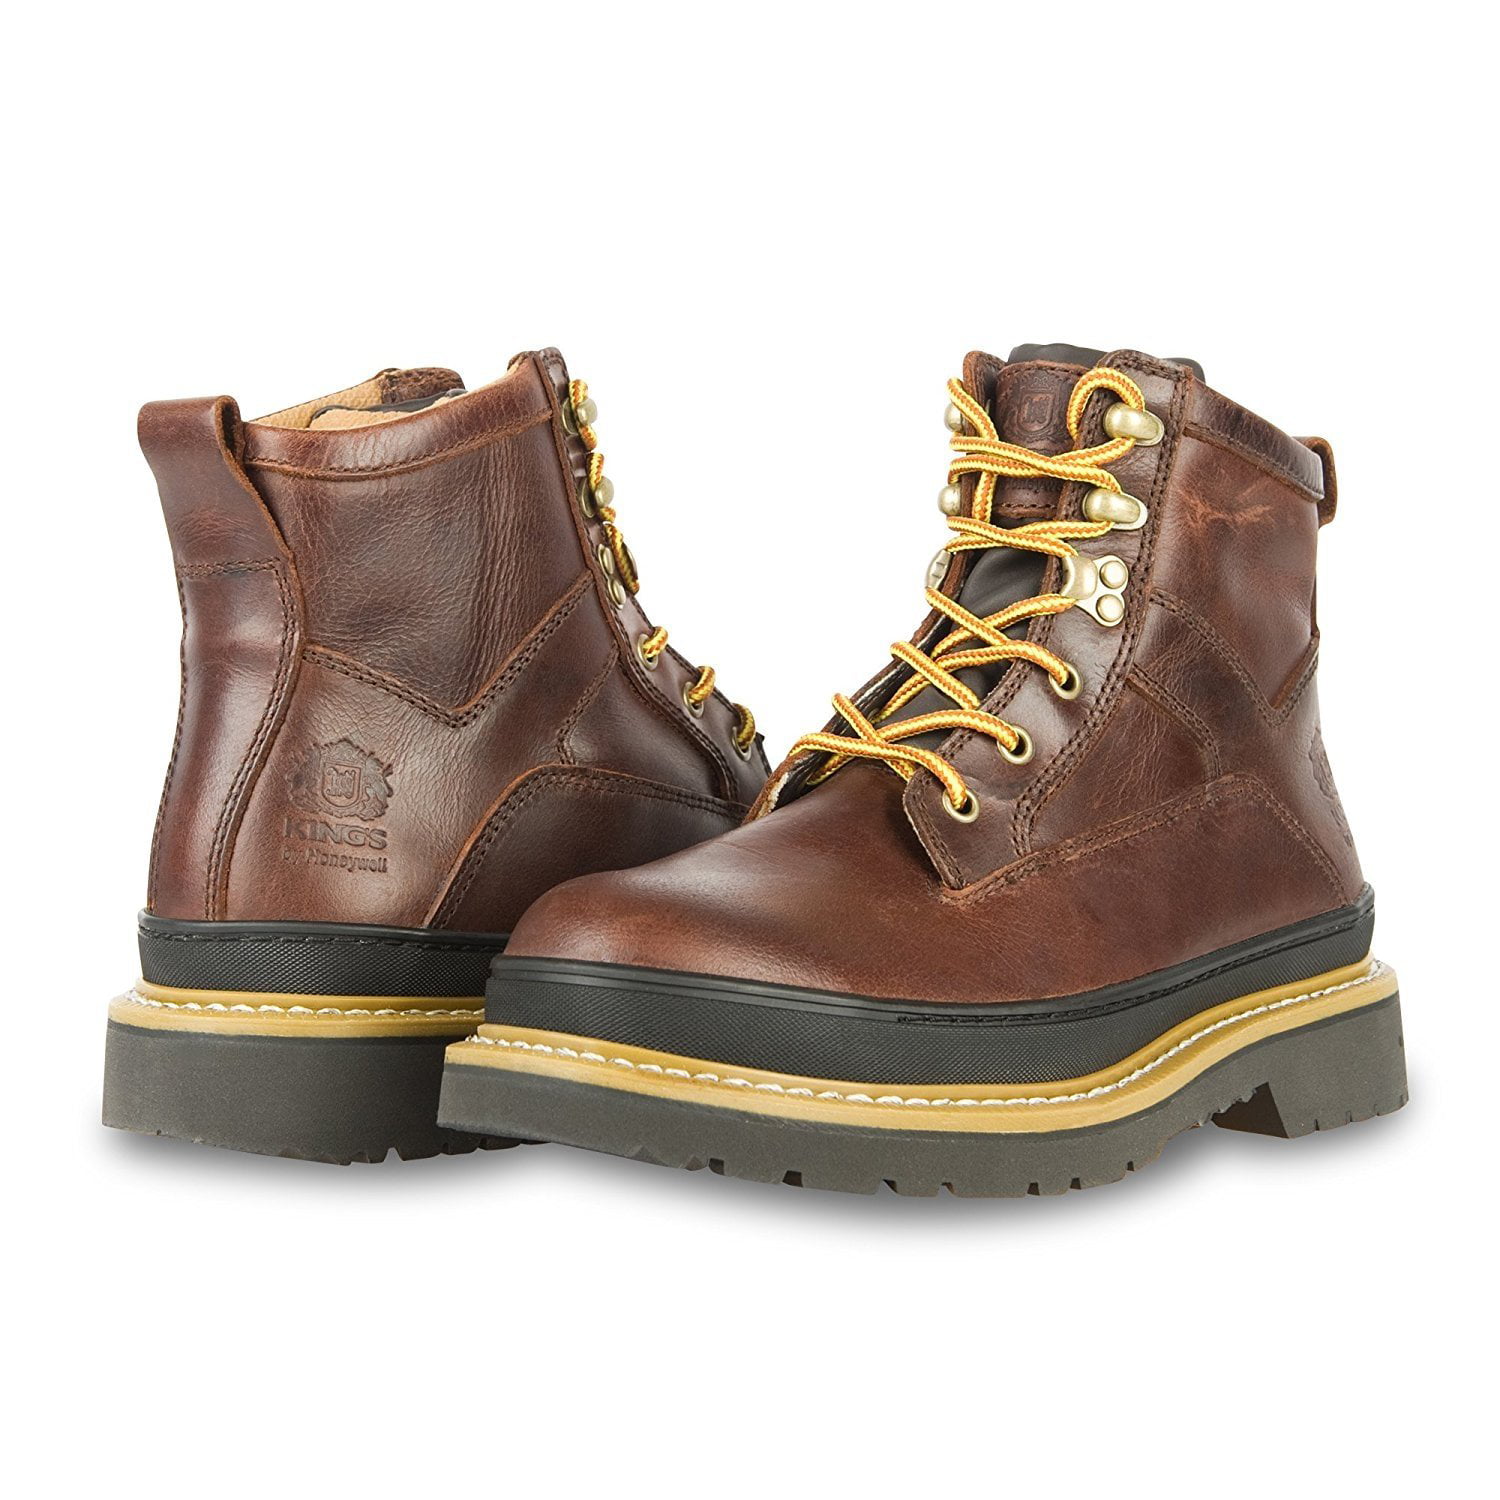 king's by honeywell steel toe boots